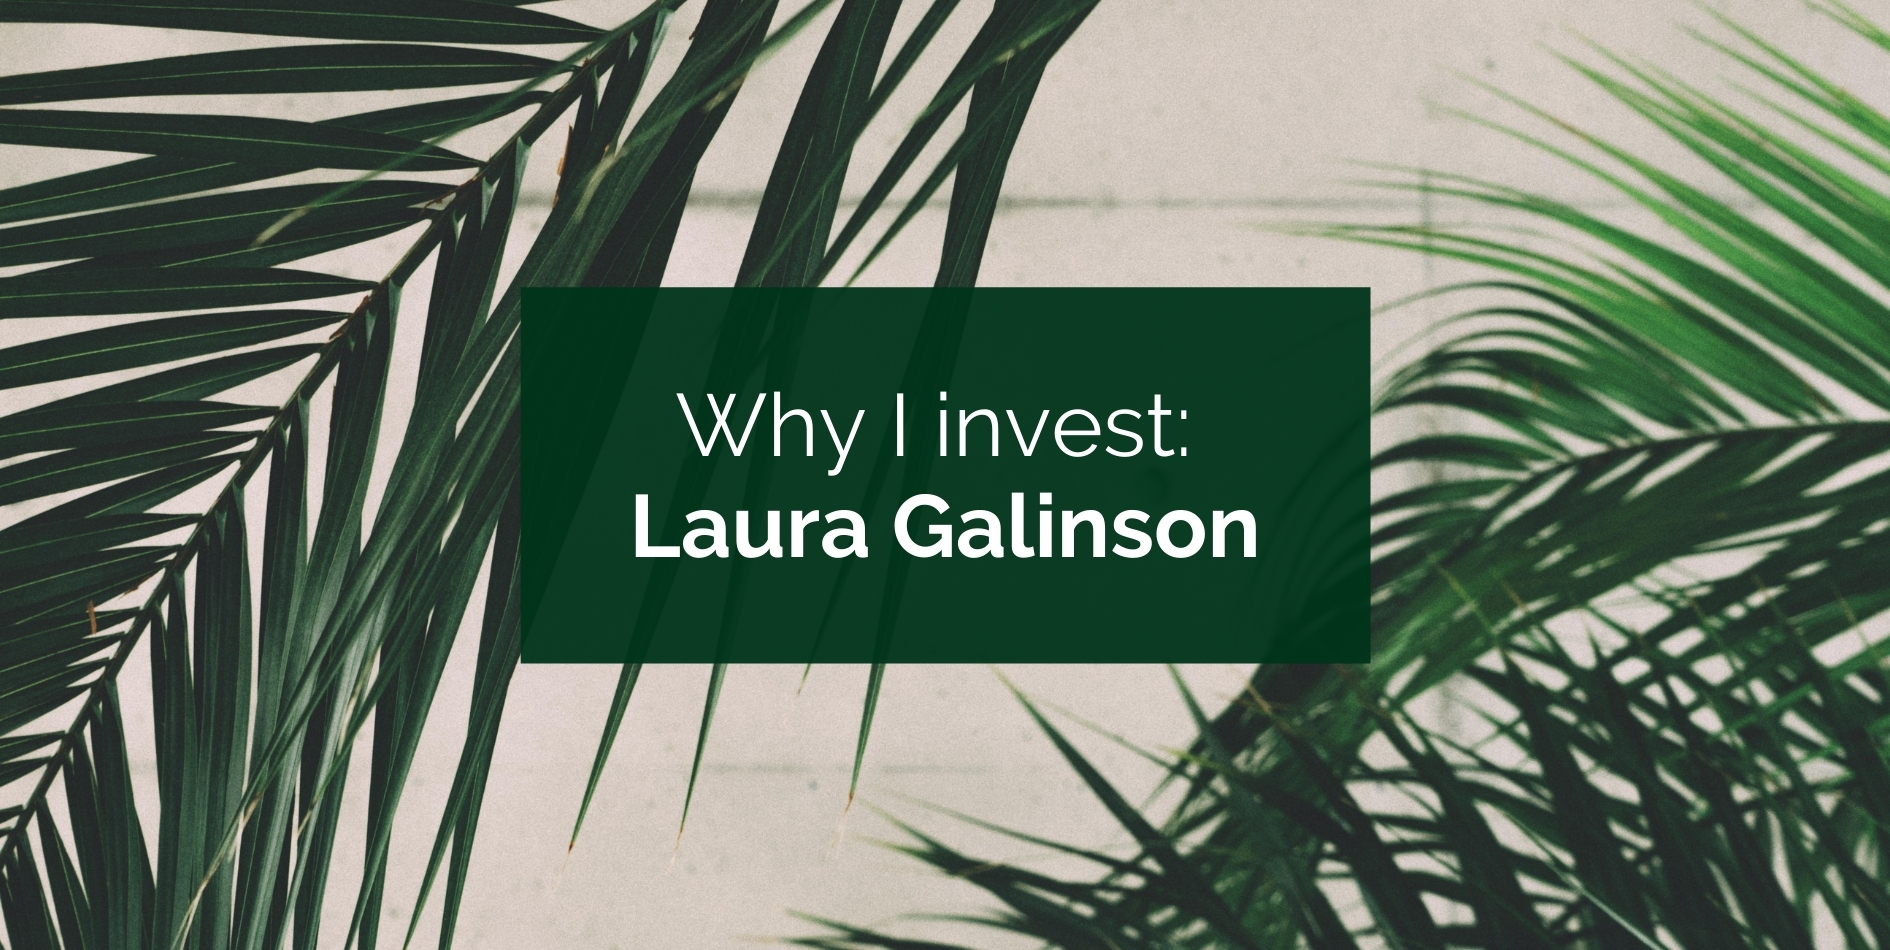 Why I invest: Laura Galinson